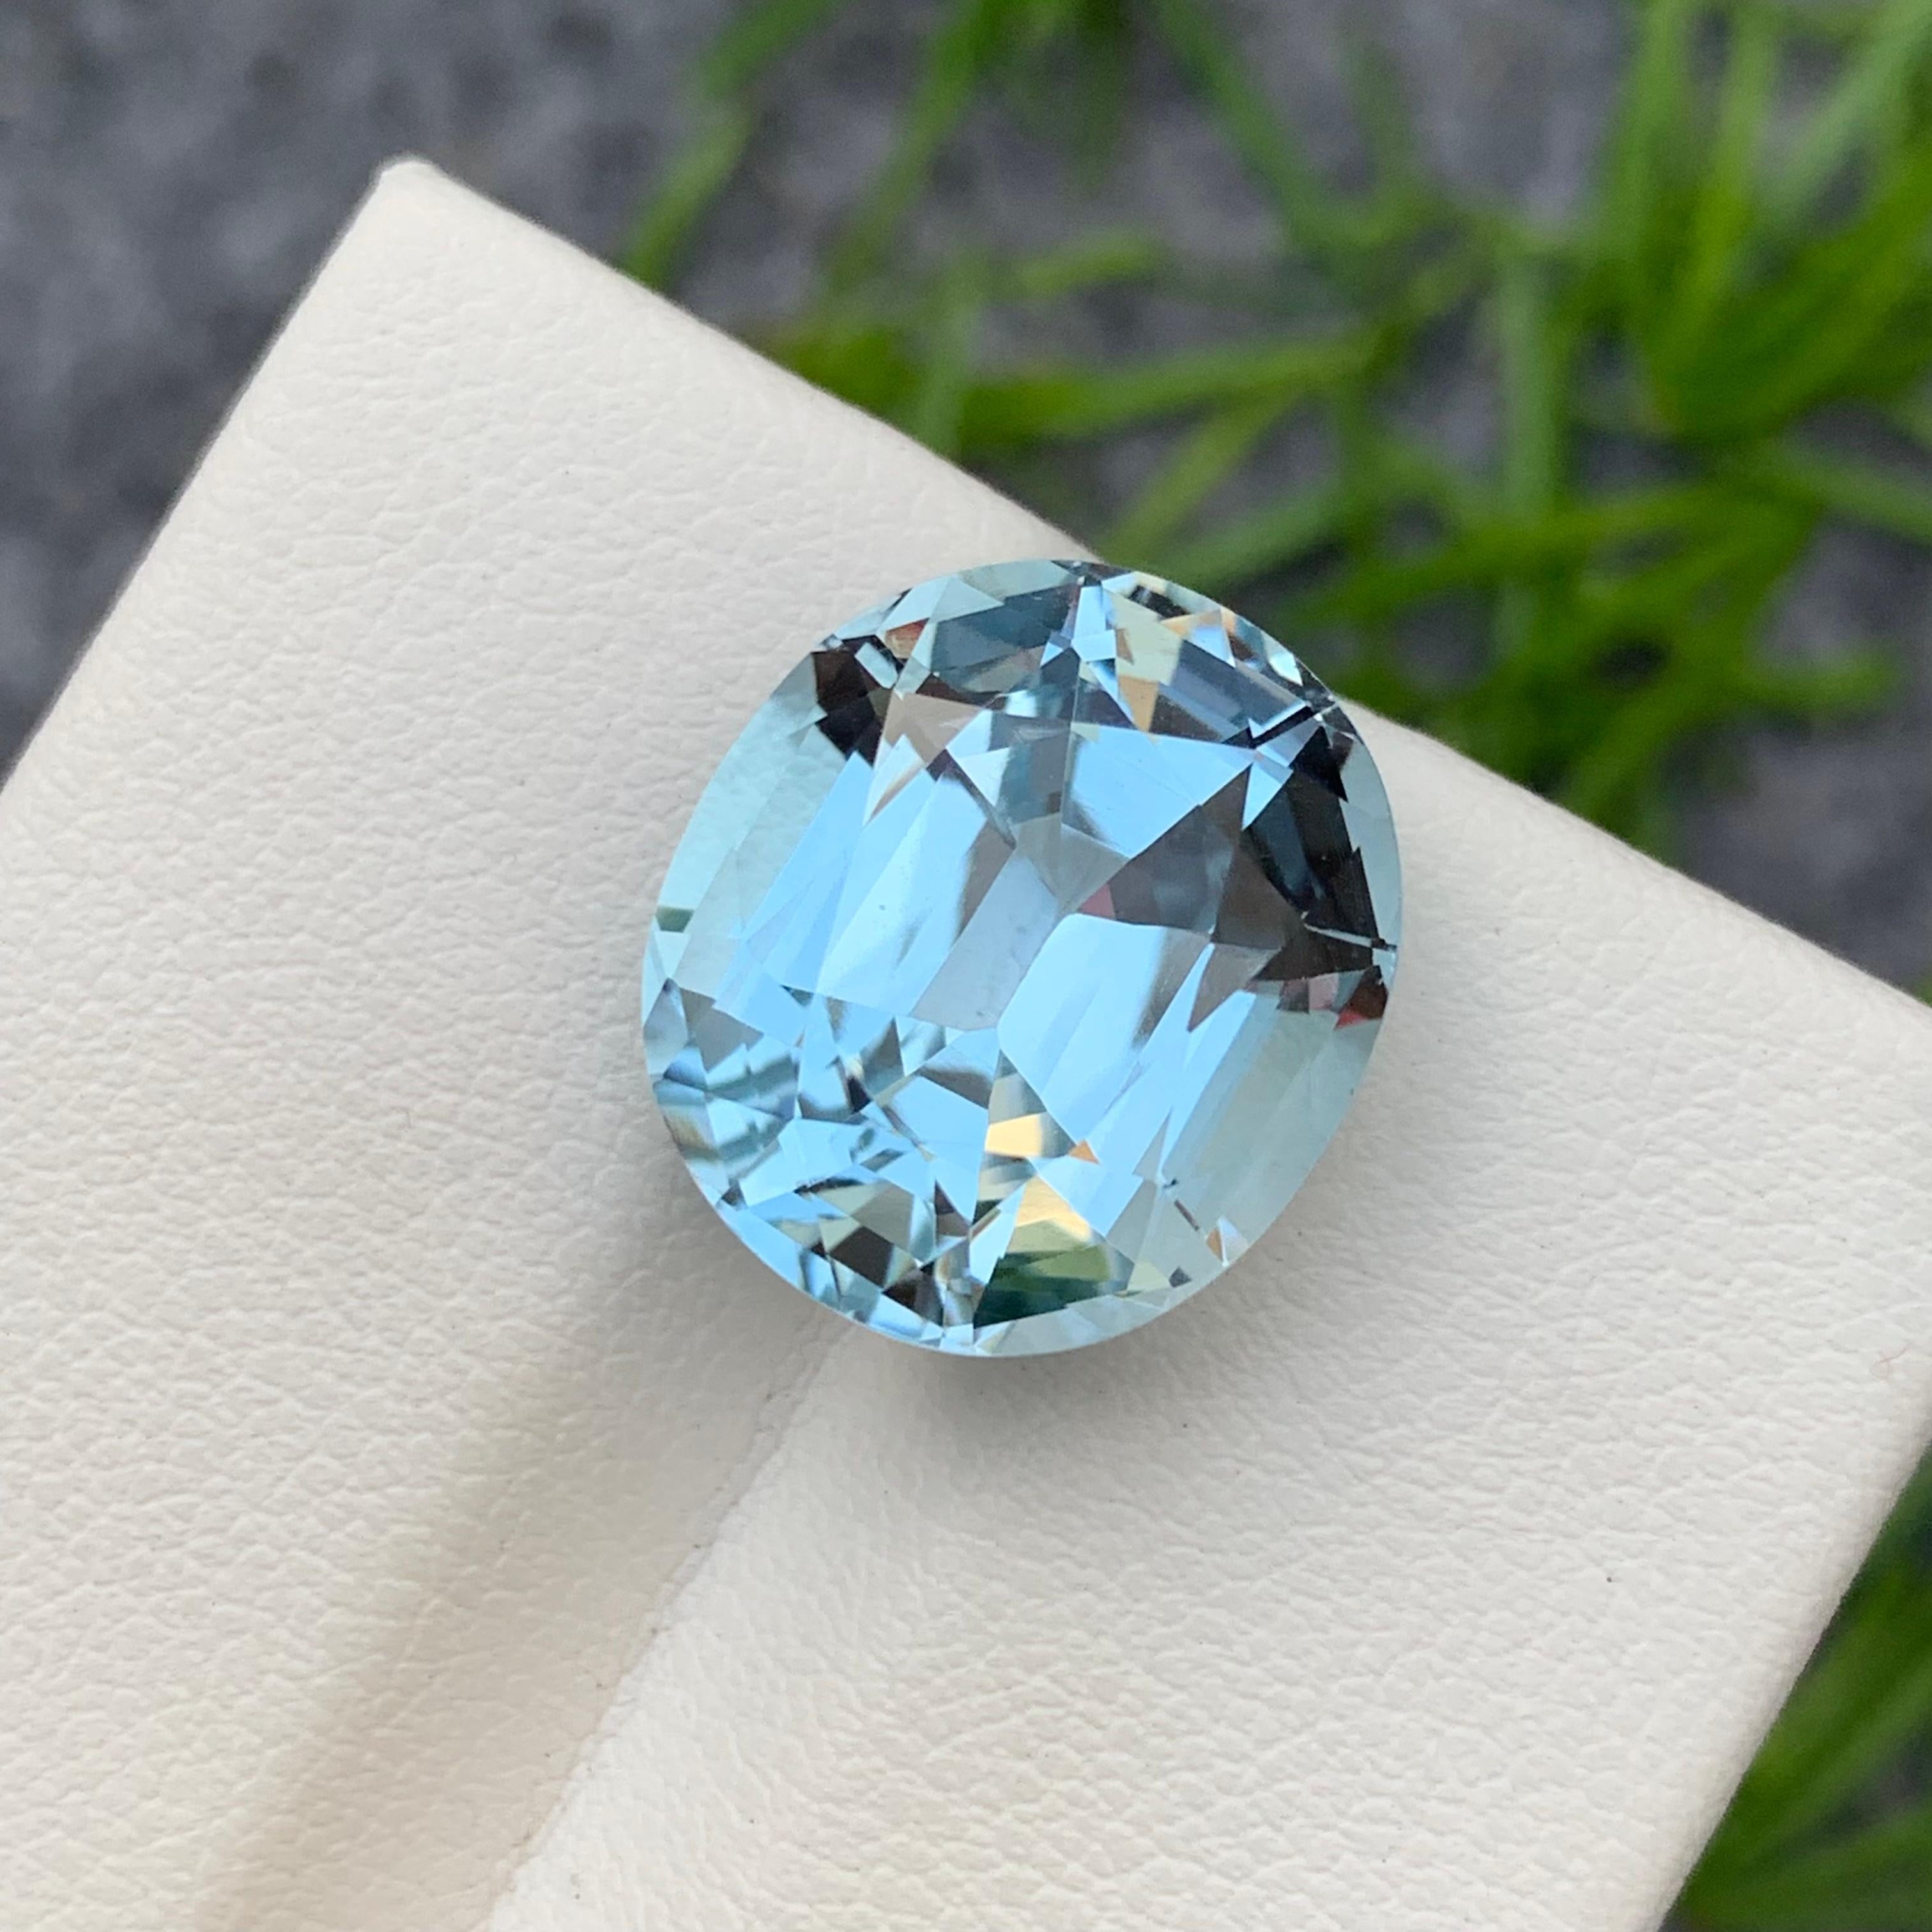 18.75 Carat Faceted Light Blue Topaz Cushion Cut Gemstone from Brazil Mine For Sale 3